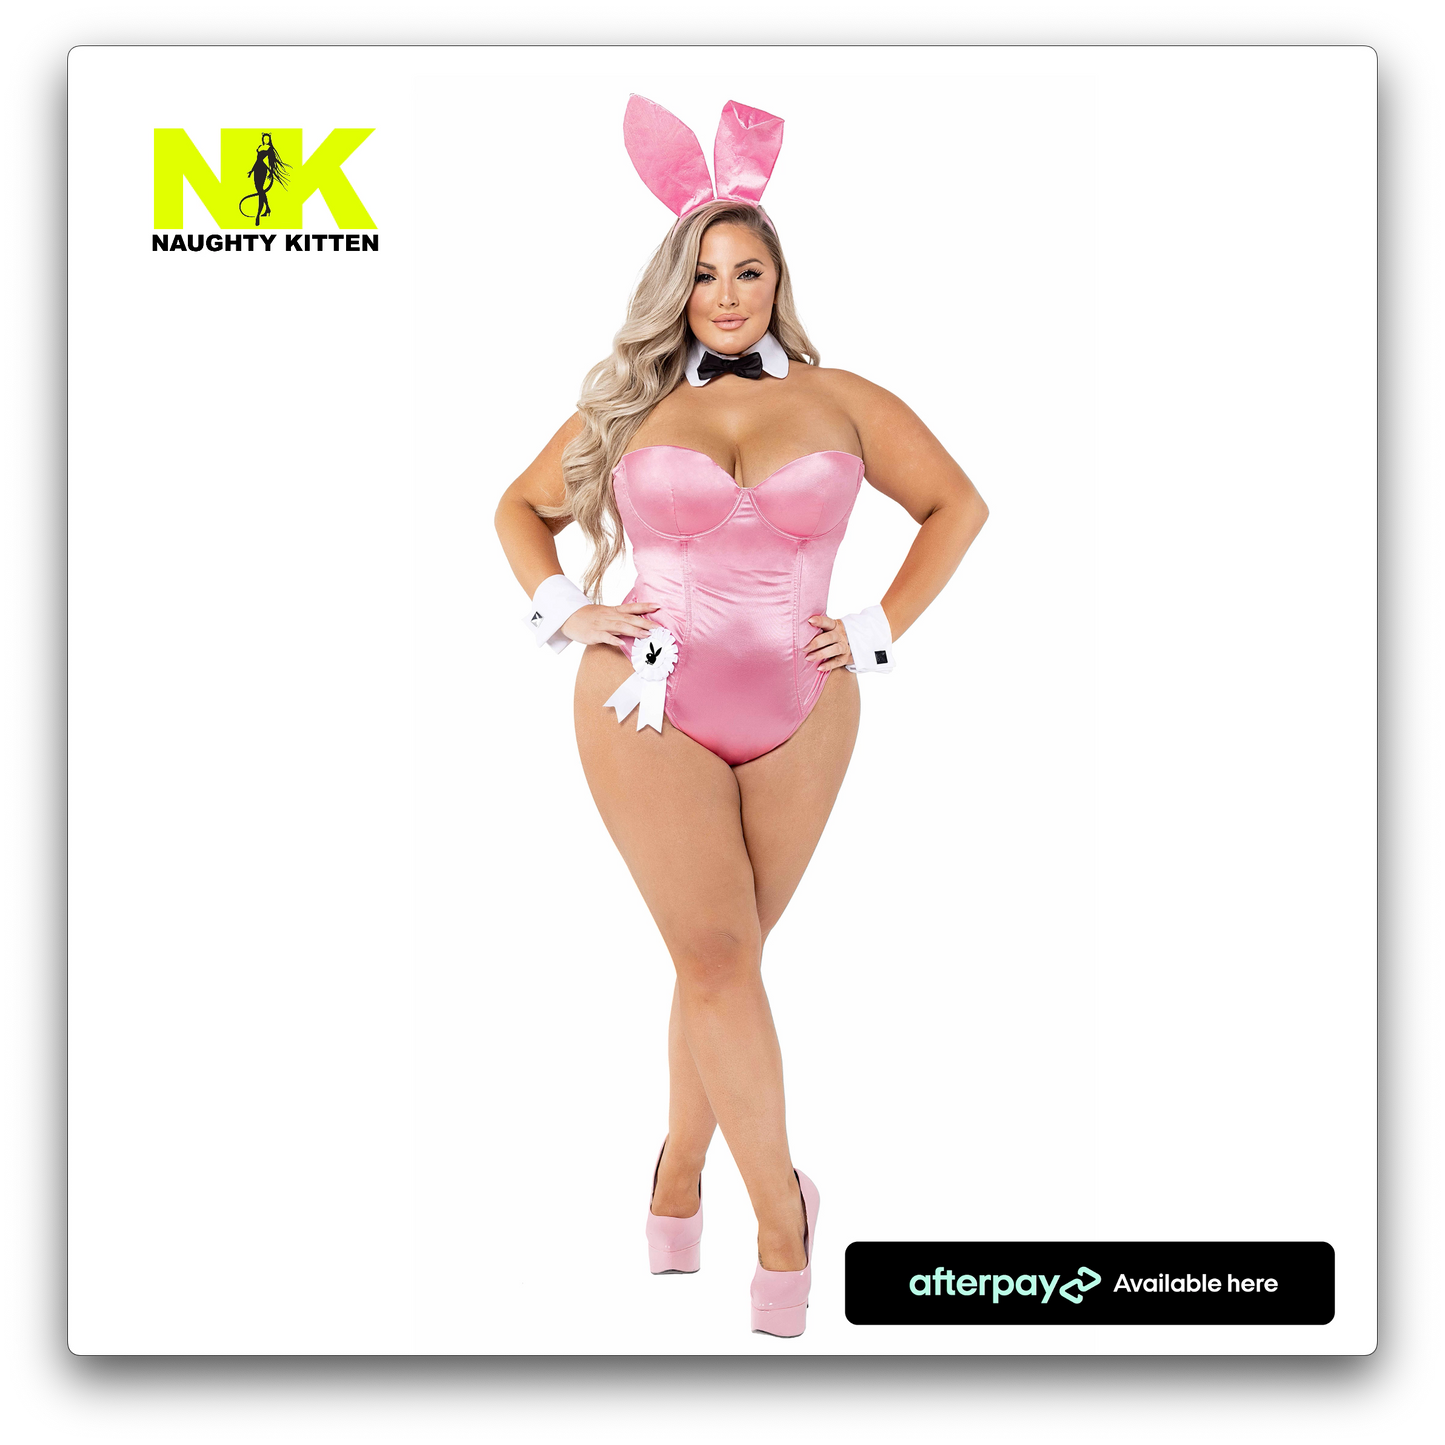 Naughty Kitten Clothing Classic Playboy Bunny Costume Pink Front View Playboy Costume Plus Size